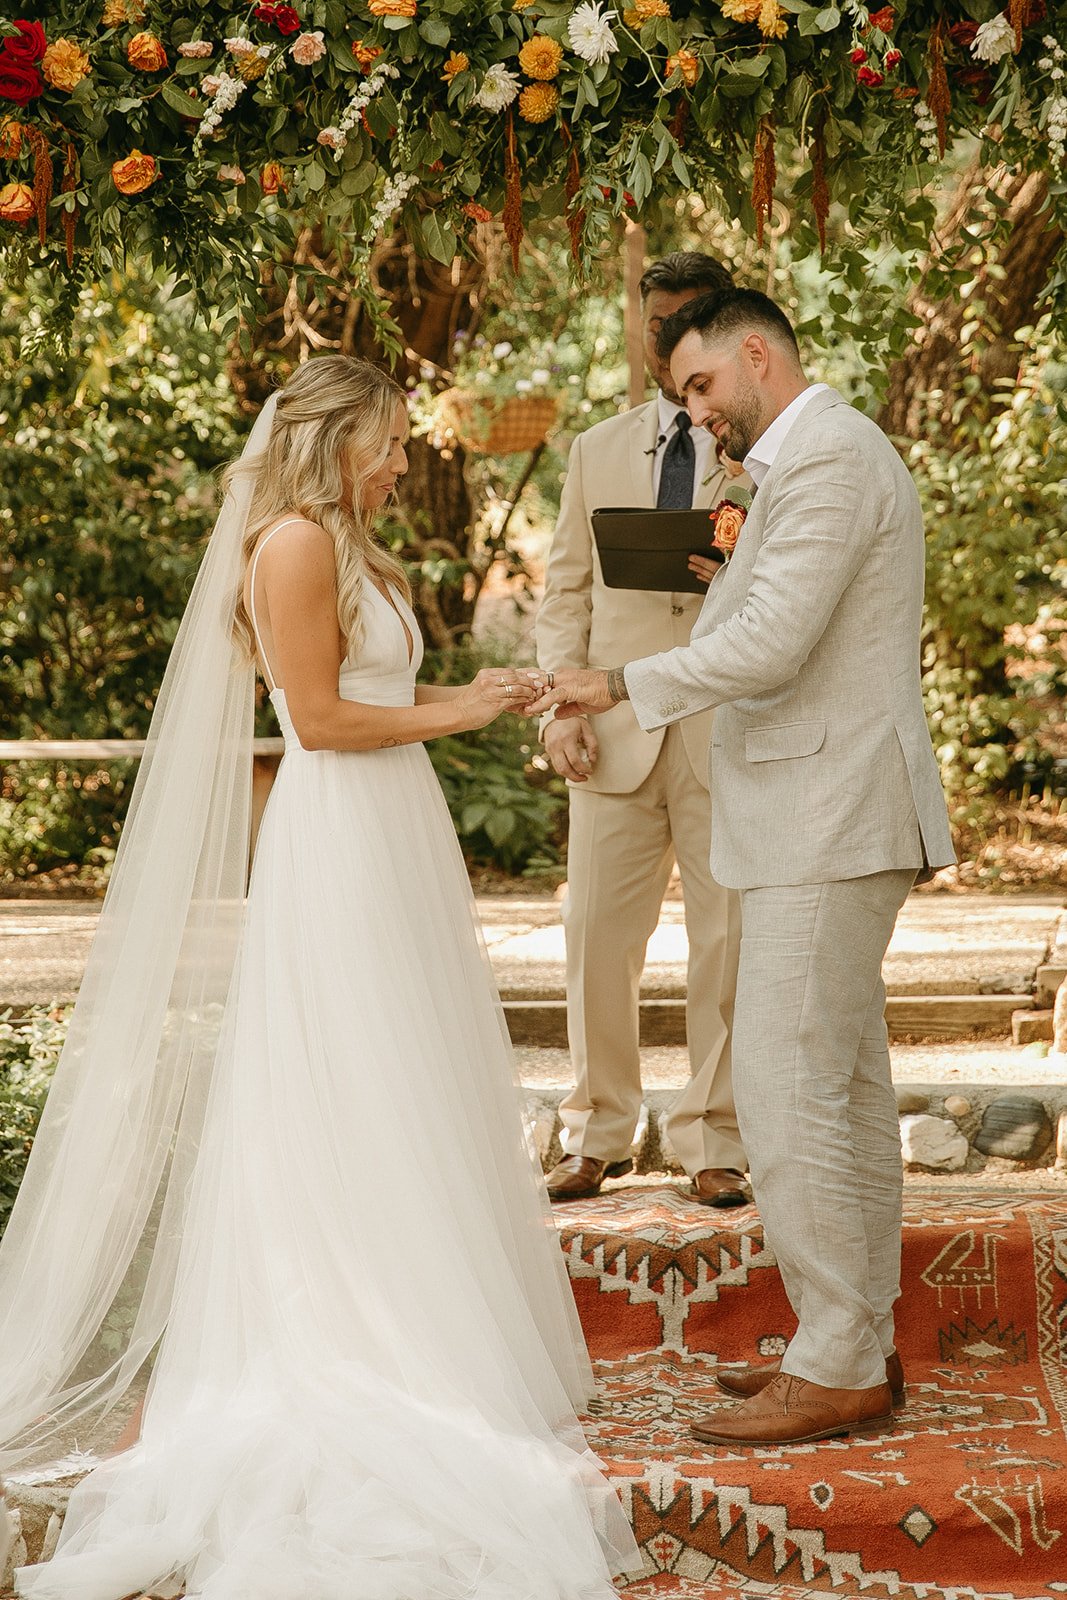 Intimate outdoor Wedding ceremony in California with Rustic colors and summer florals